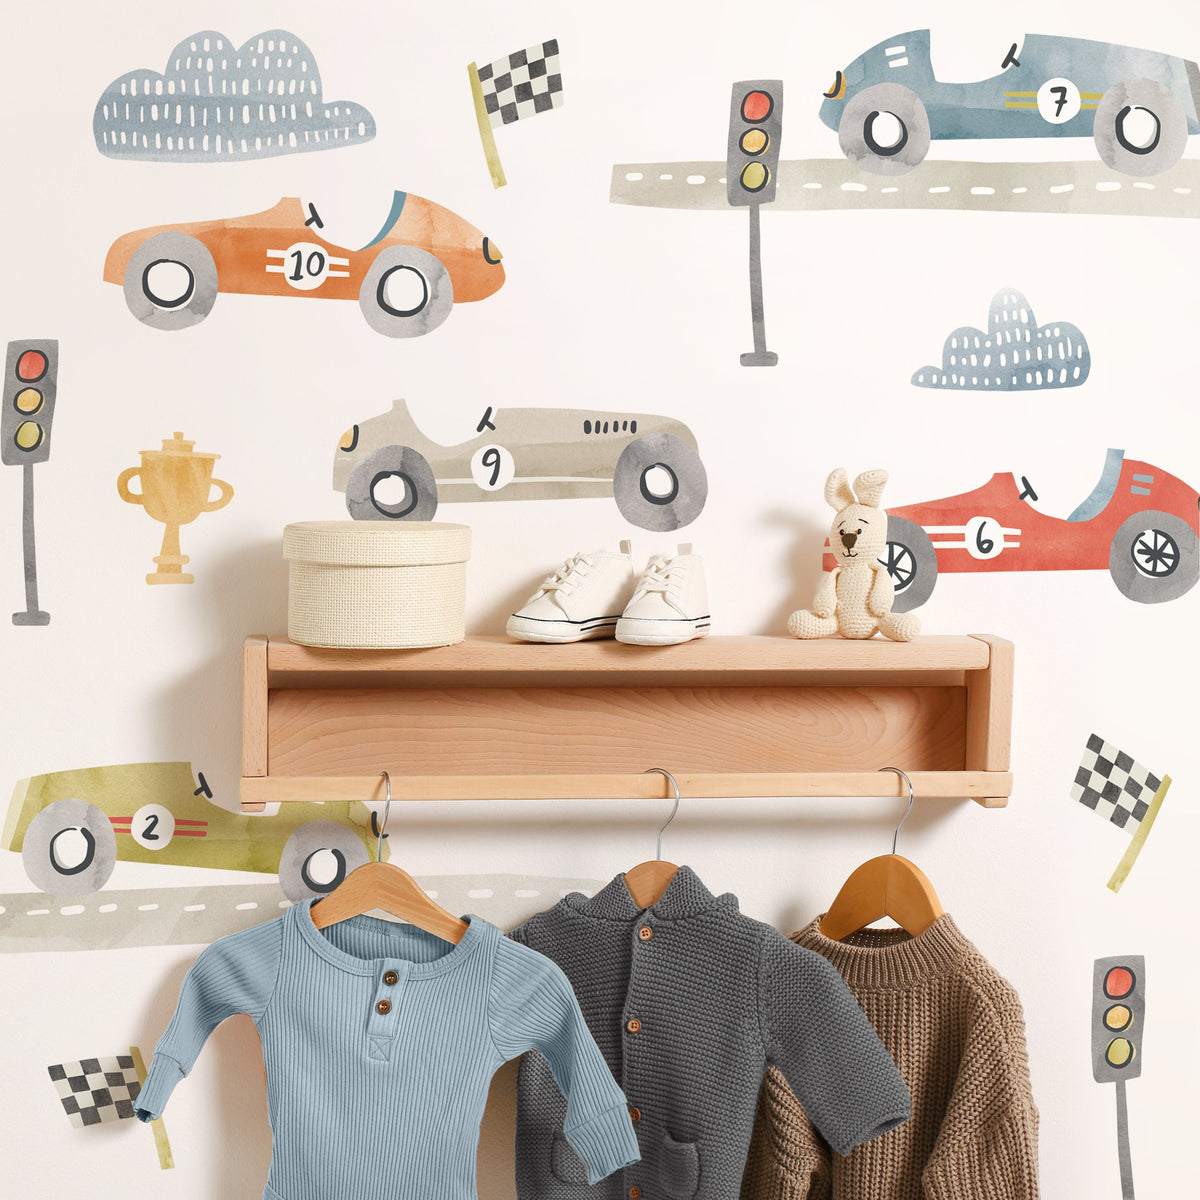 Hot Rod Wall Decal Set - Small